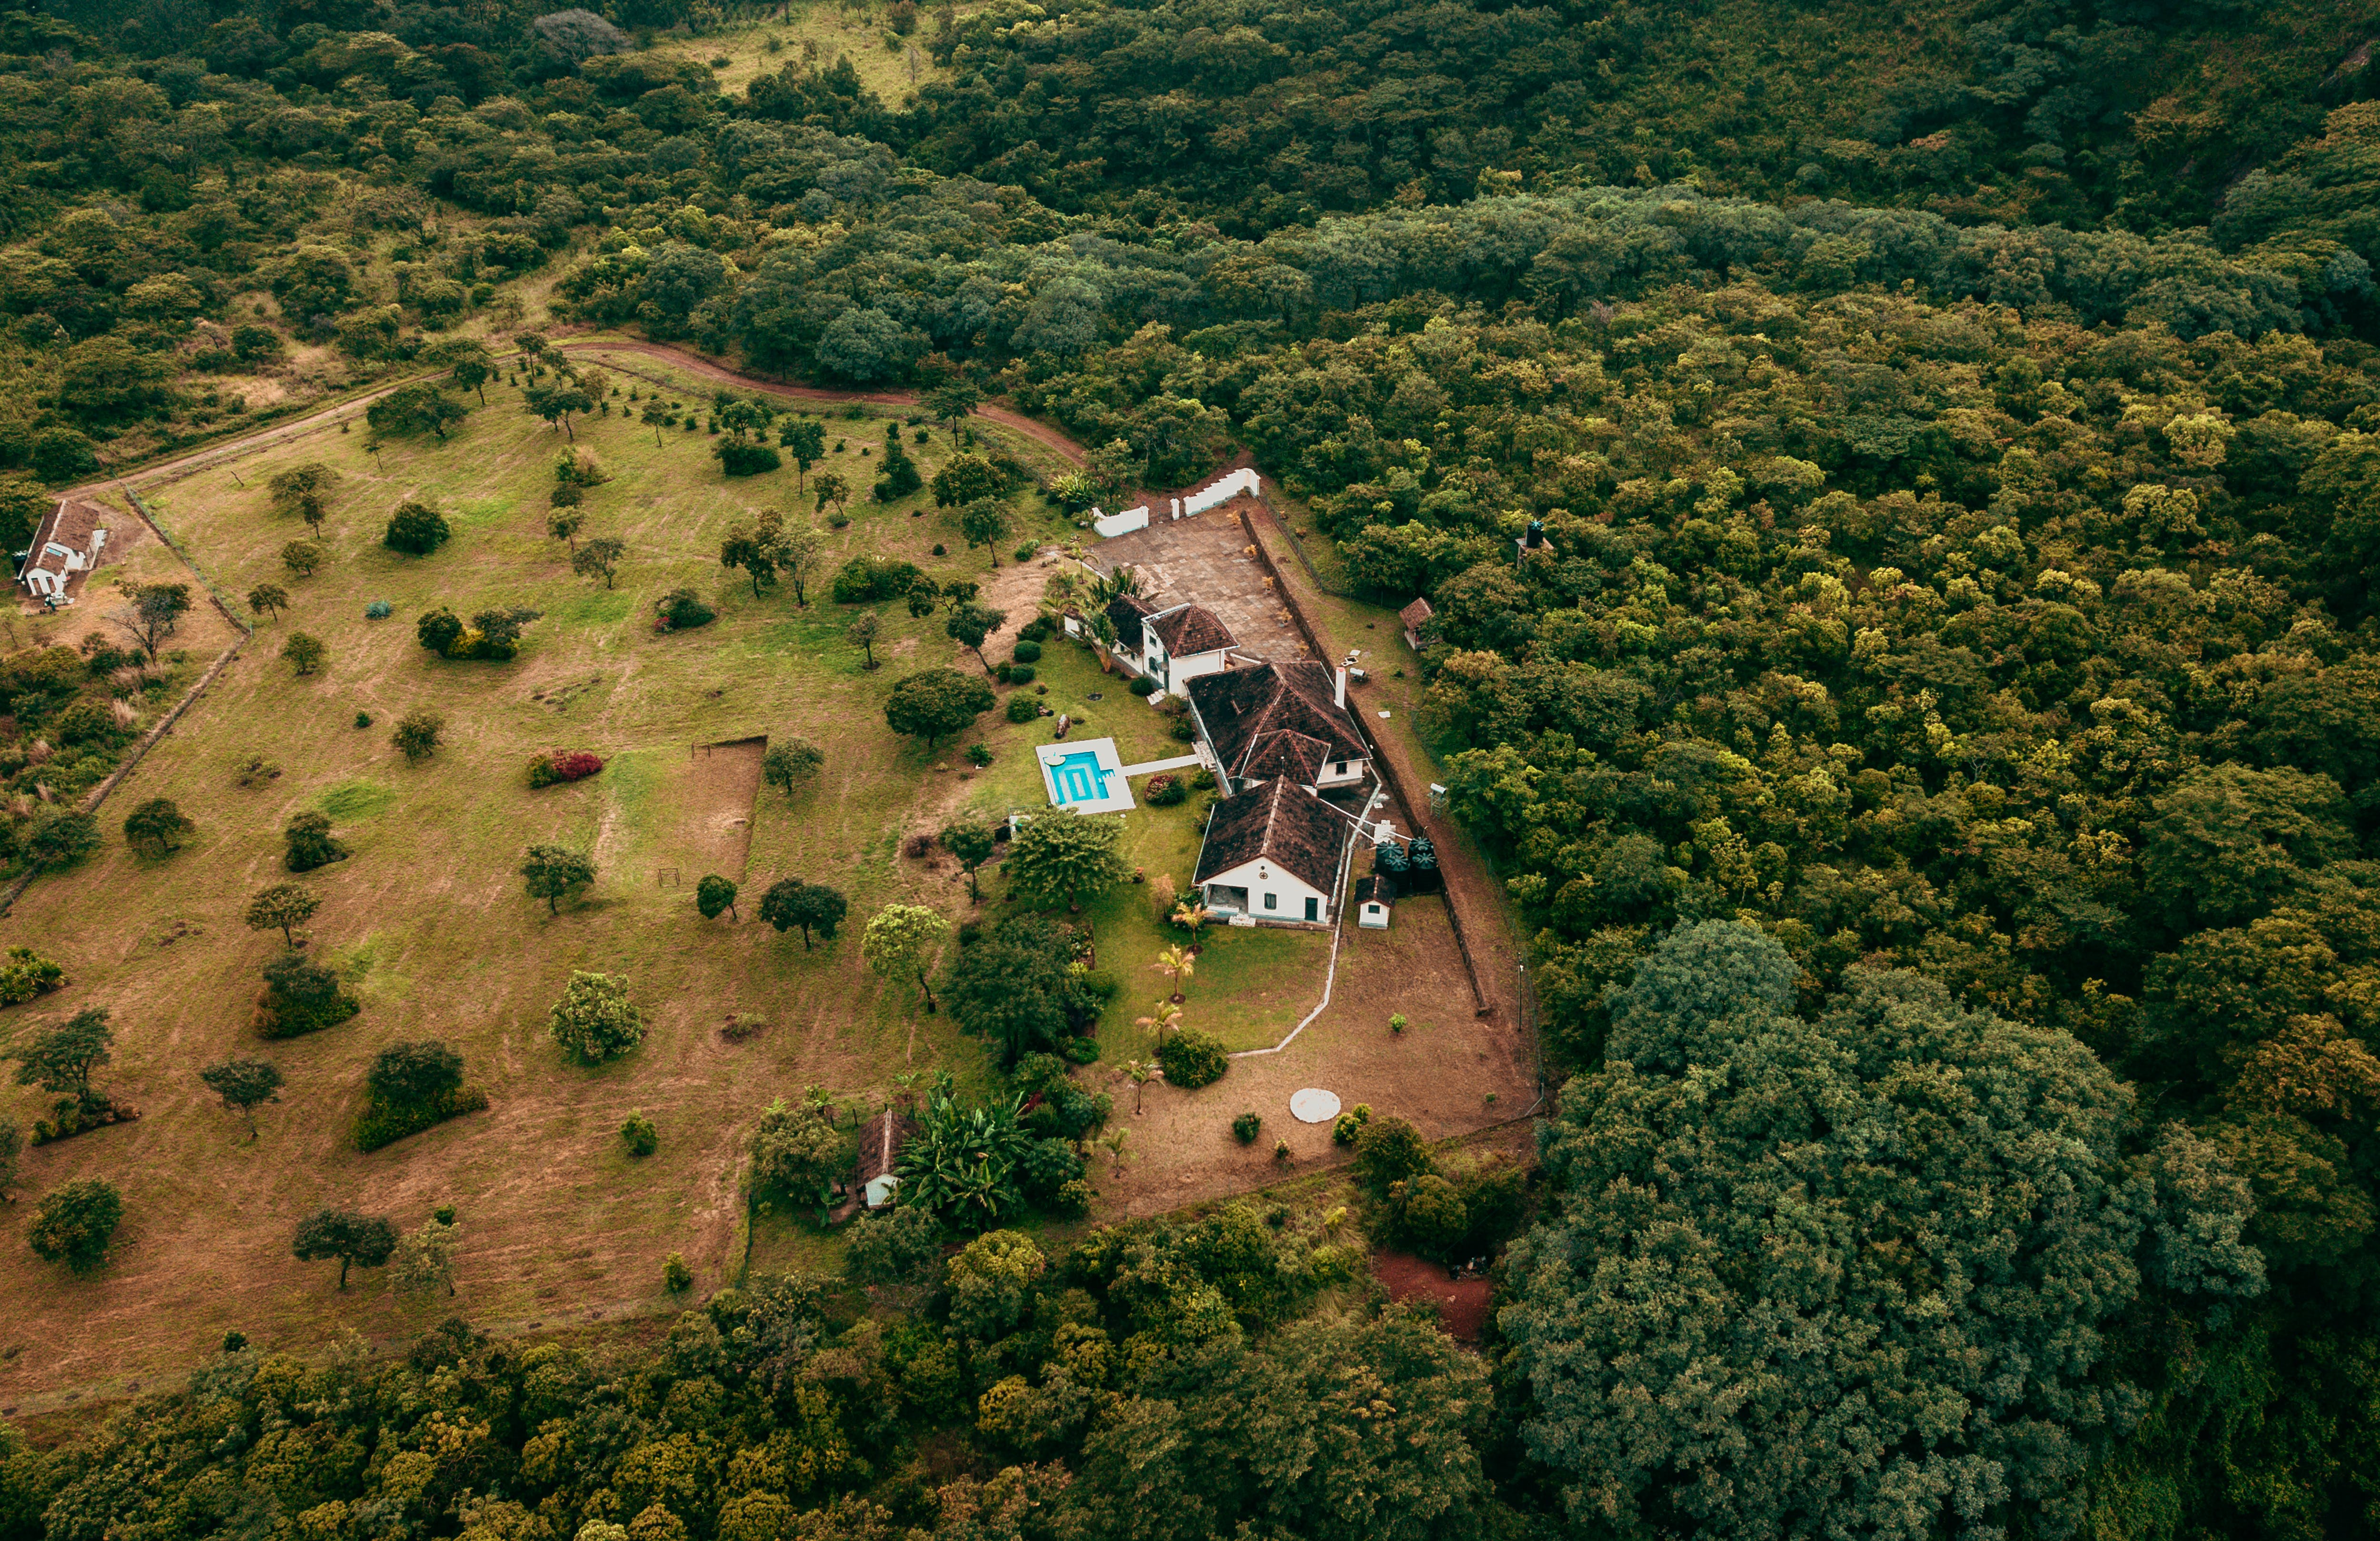 An overview of a property surrounded by trees | Source: Pexels